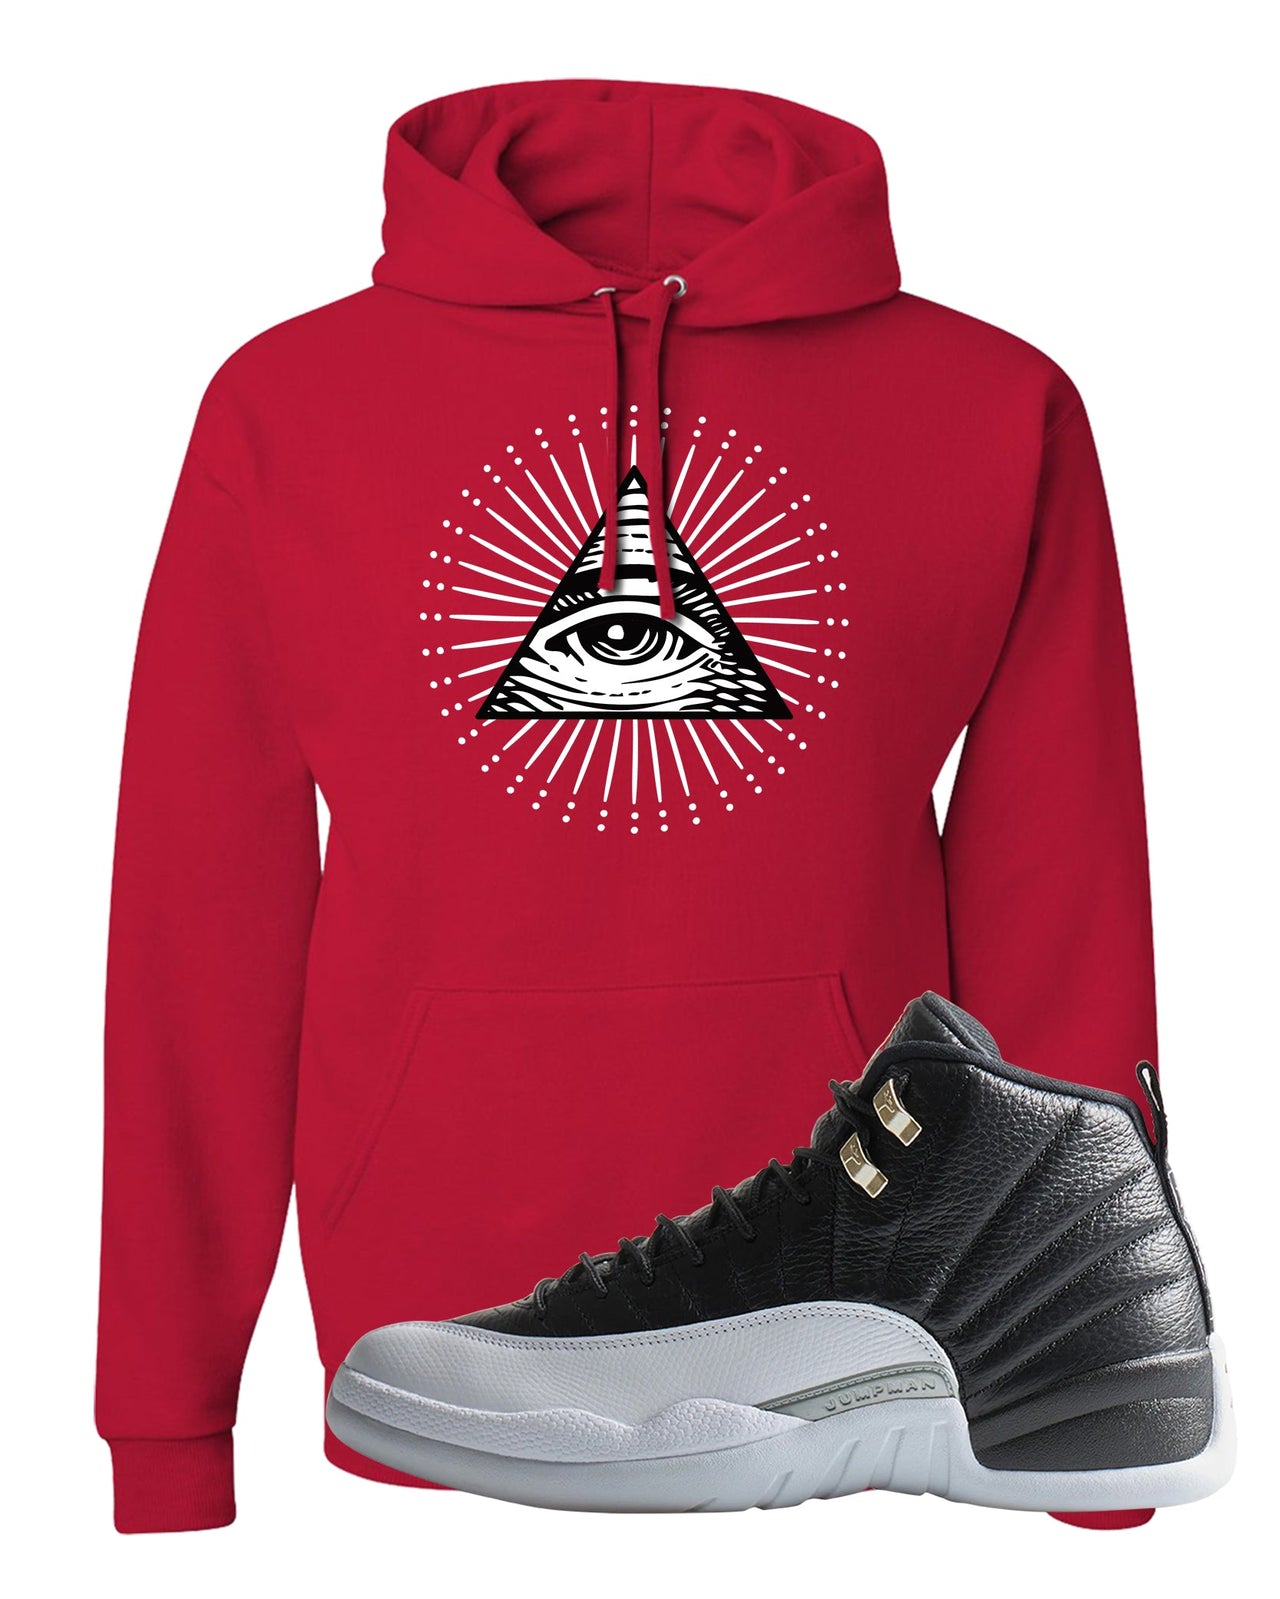 Playoff 12s Hoodie | All Seeing Eye, Red